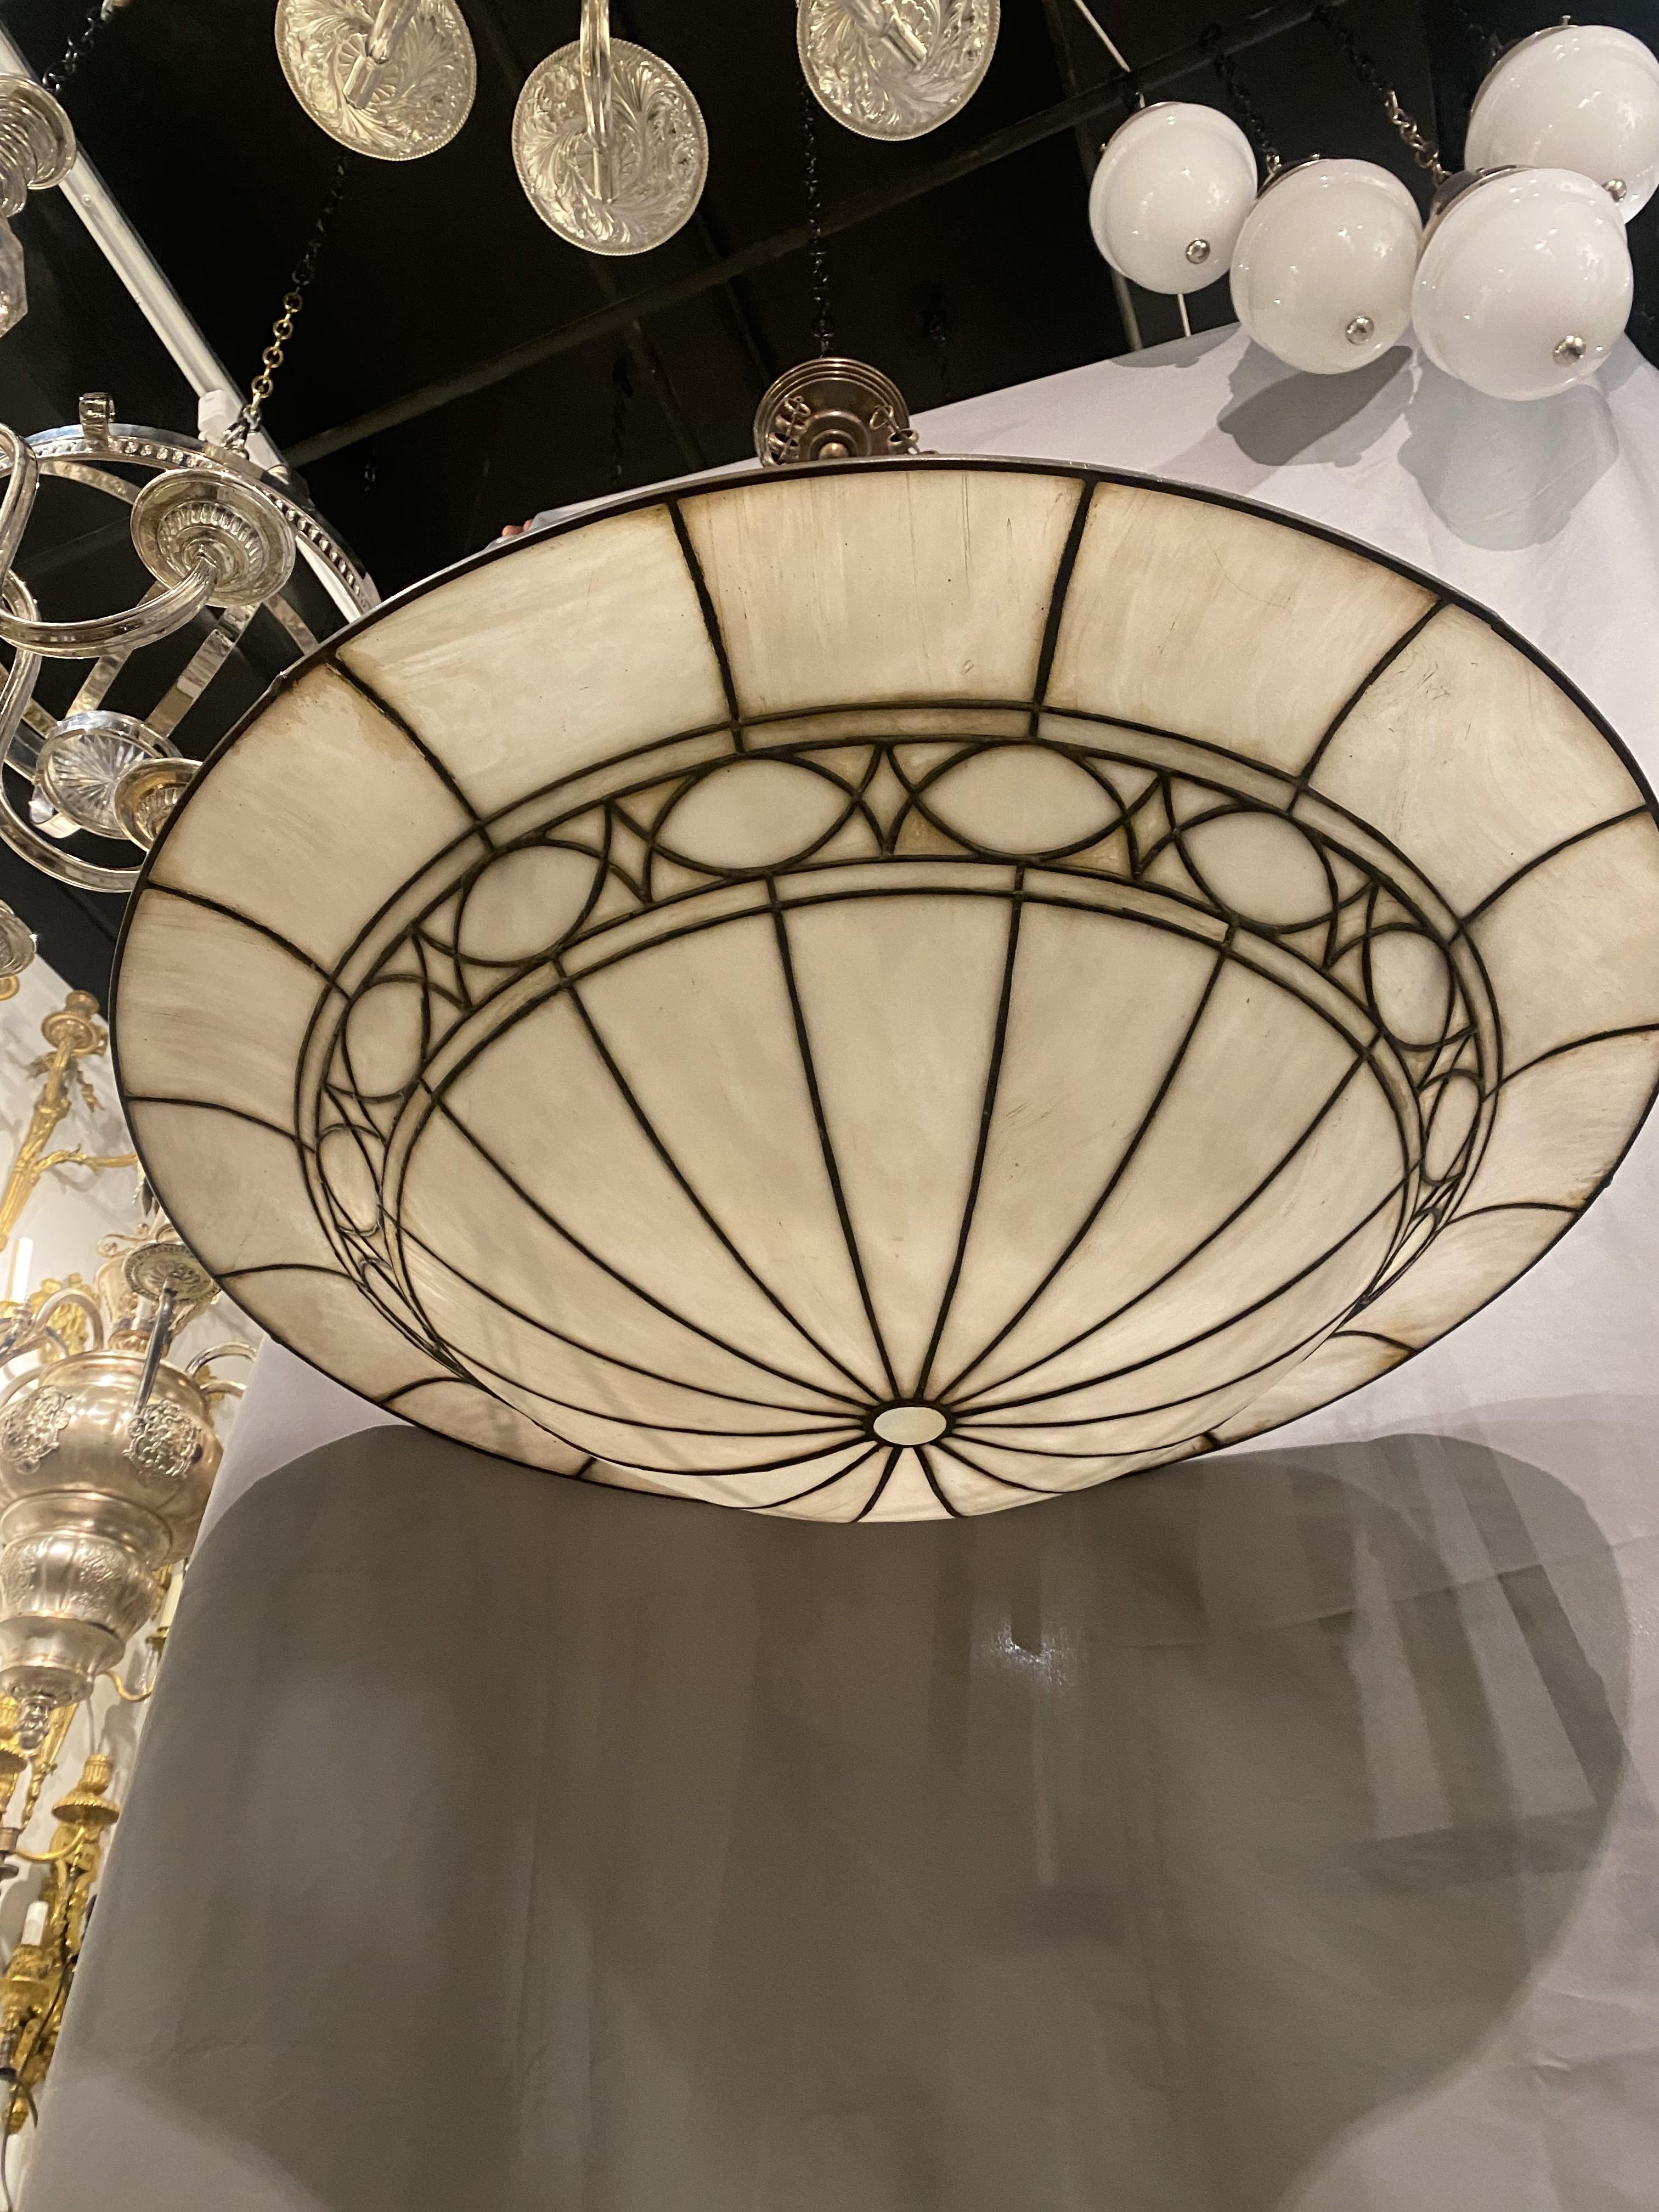 A circa 1920's large unusual shape leaded glass light fixture with (8 interior lights)